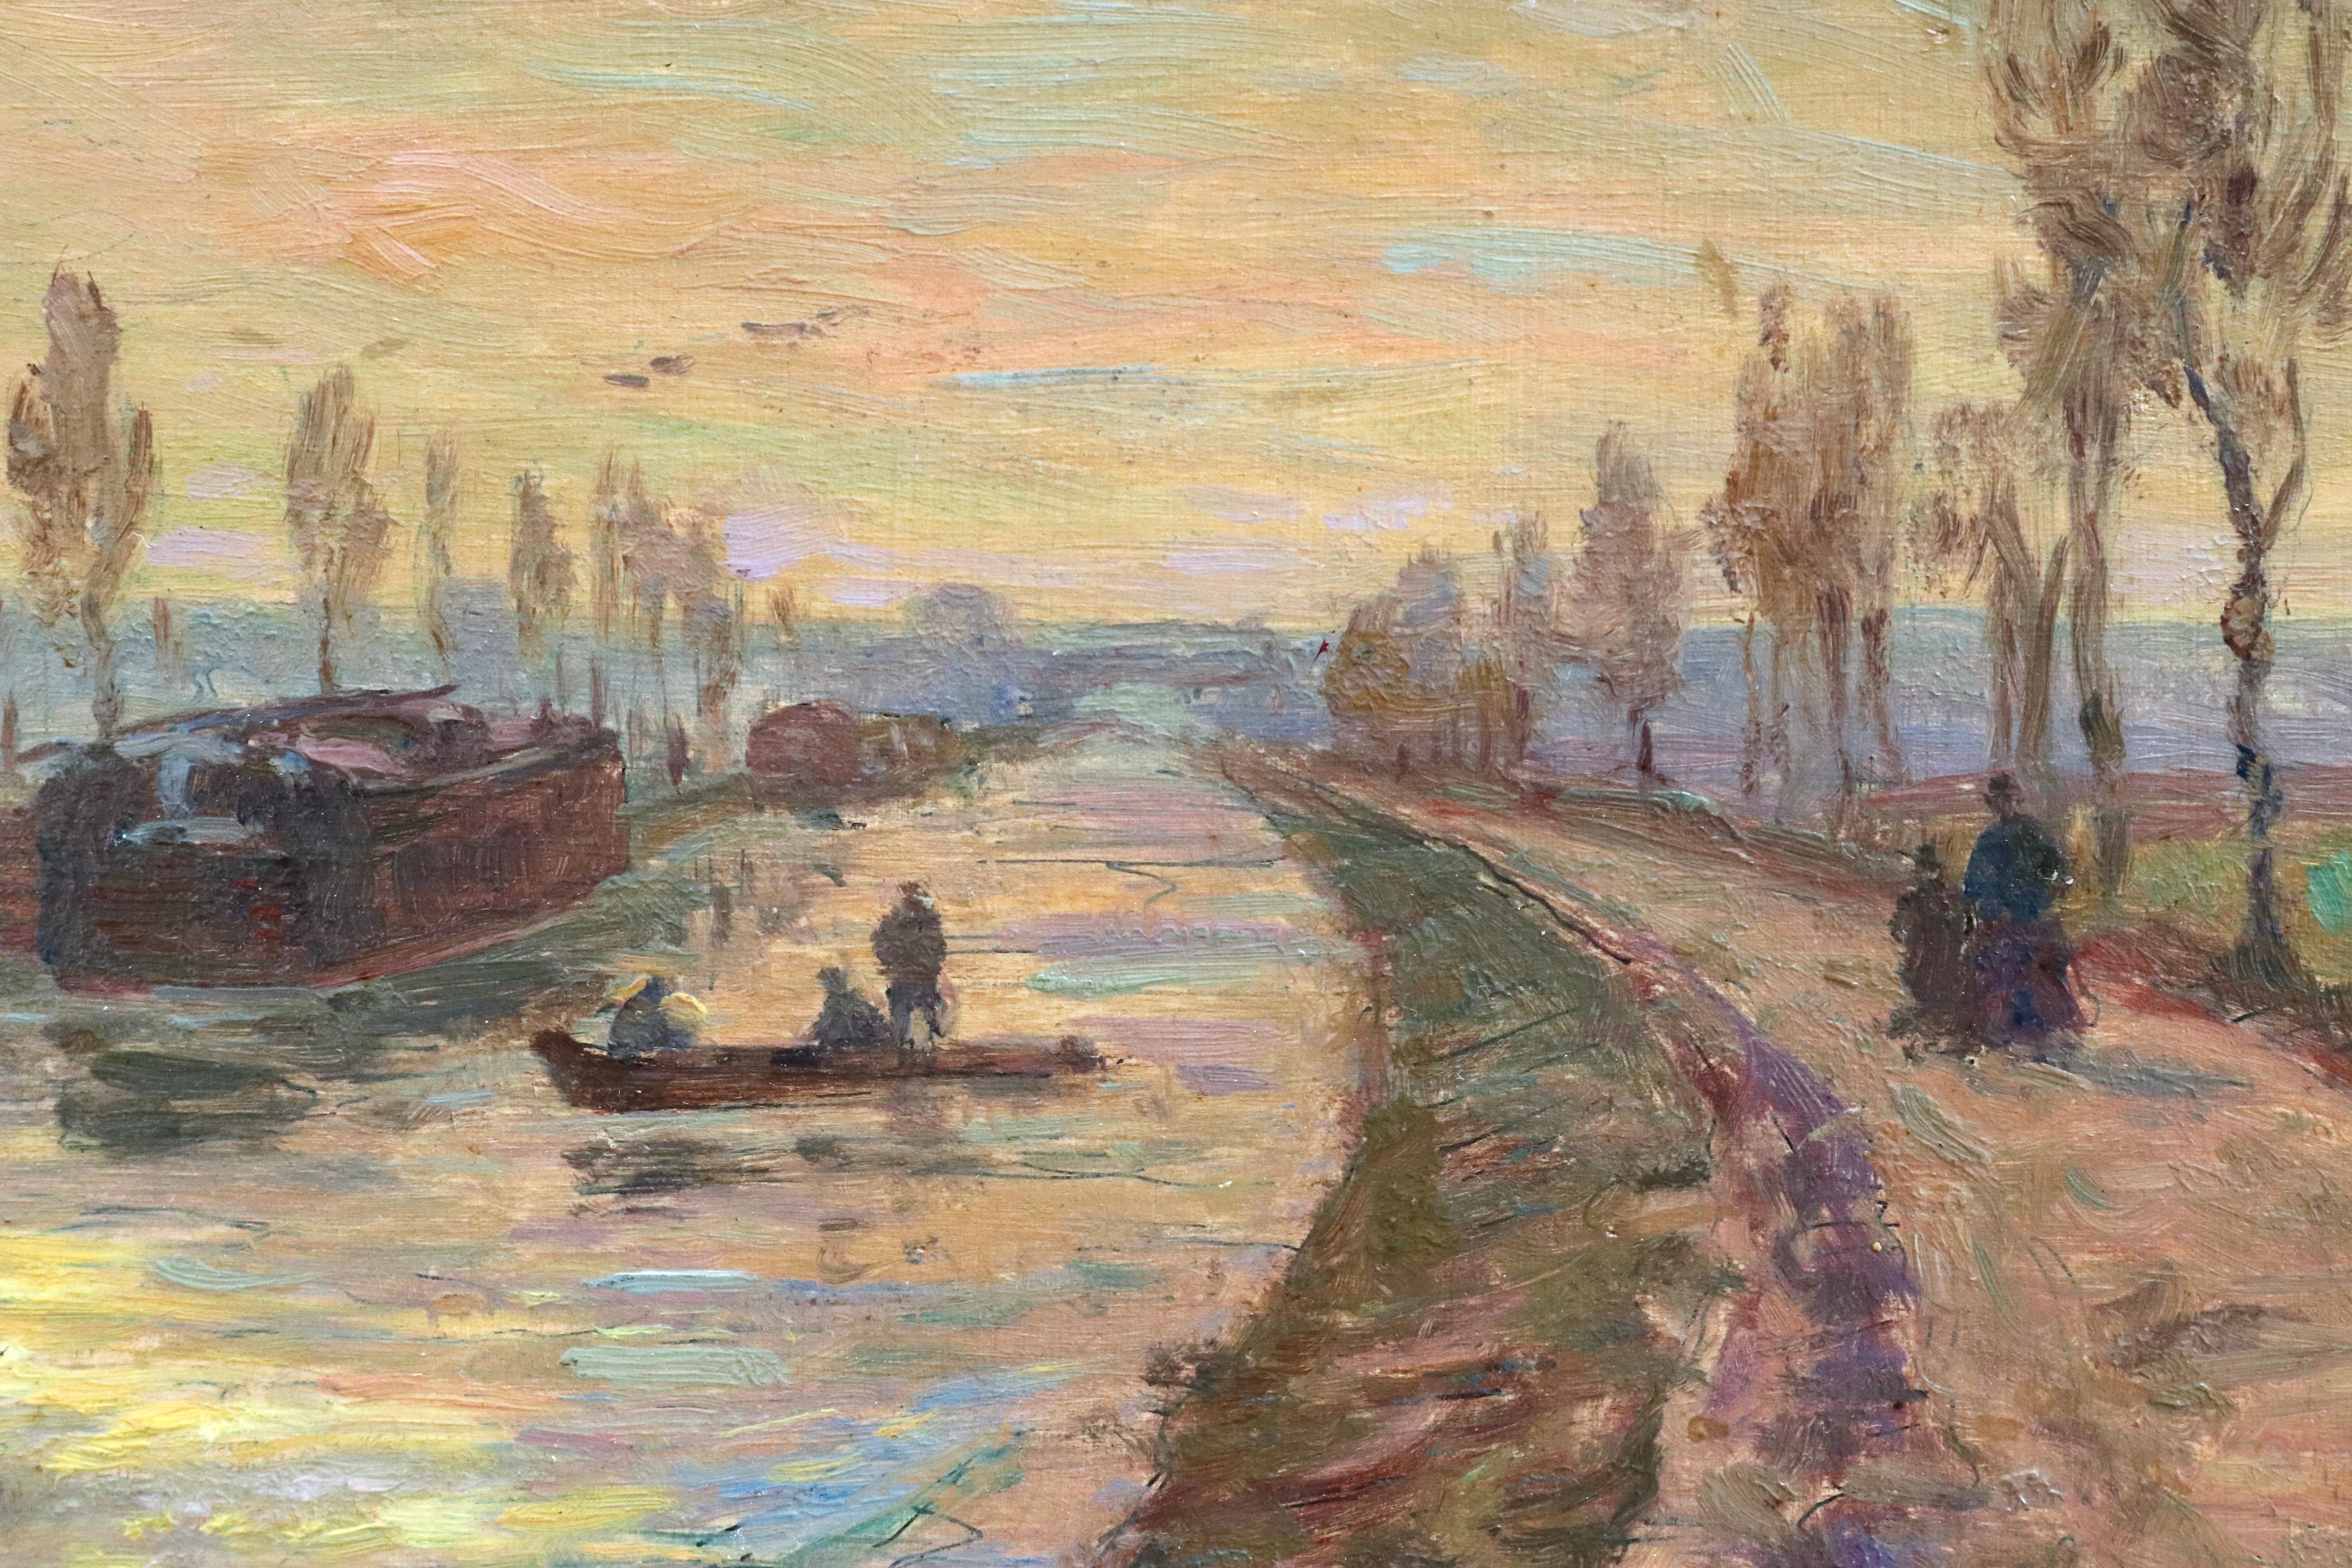 Sunset over the Canal - Douai - 19th Century Oil, Figures in Landscape by Duhem - Brown Figurative Painting by Henri Duhem